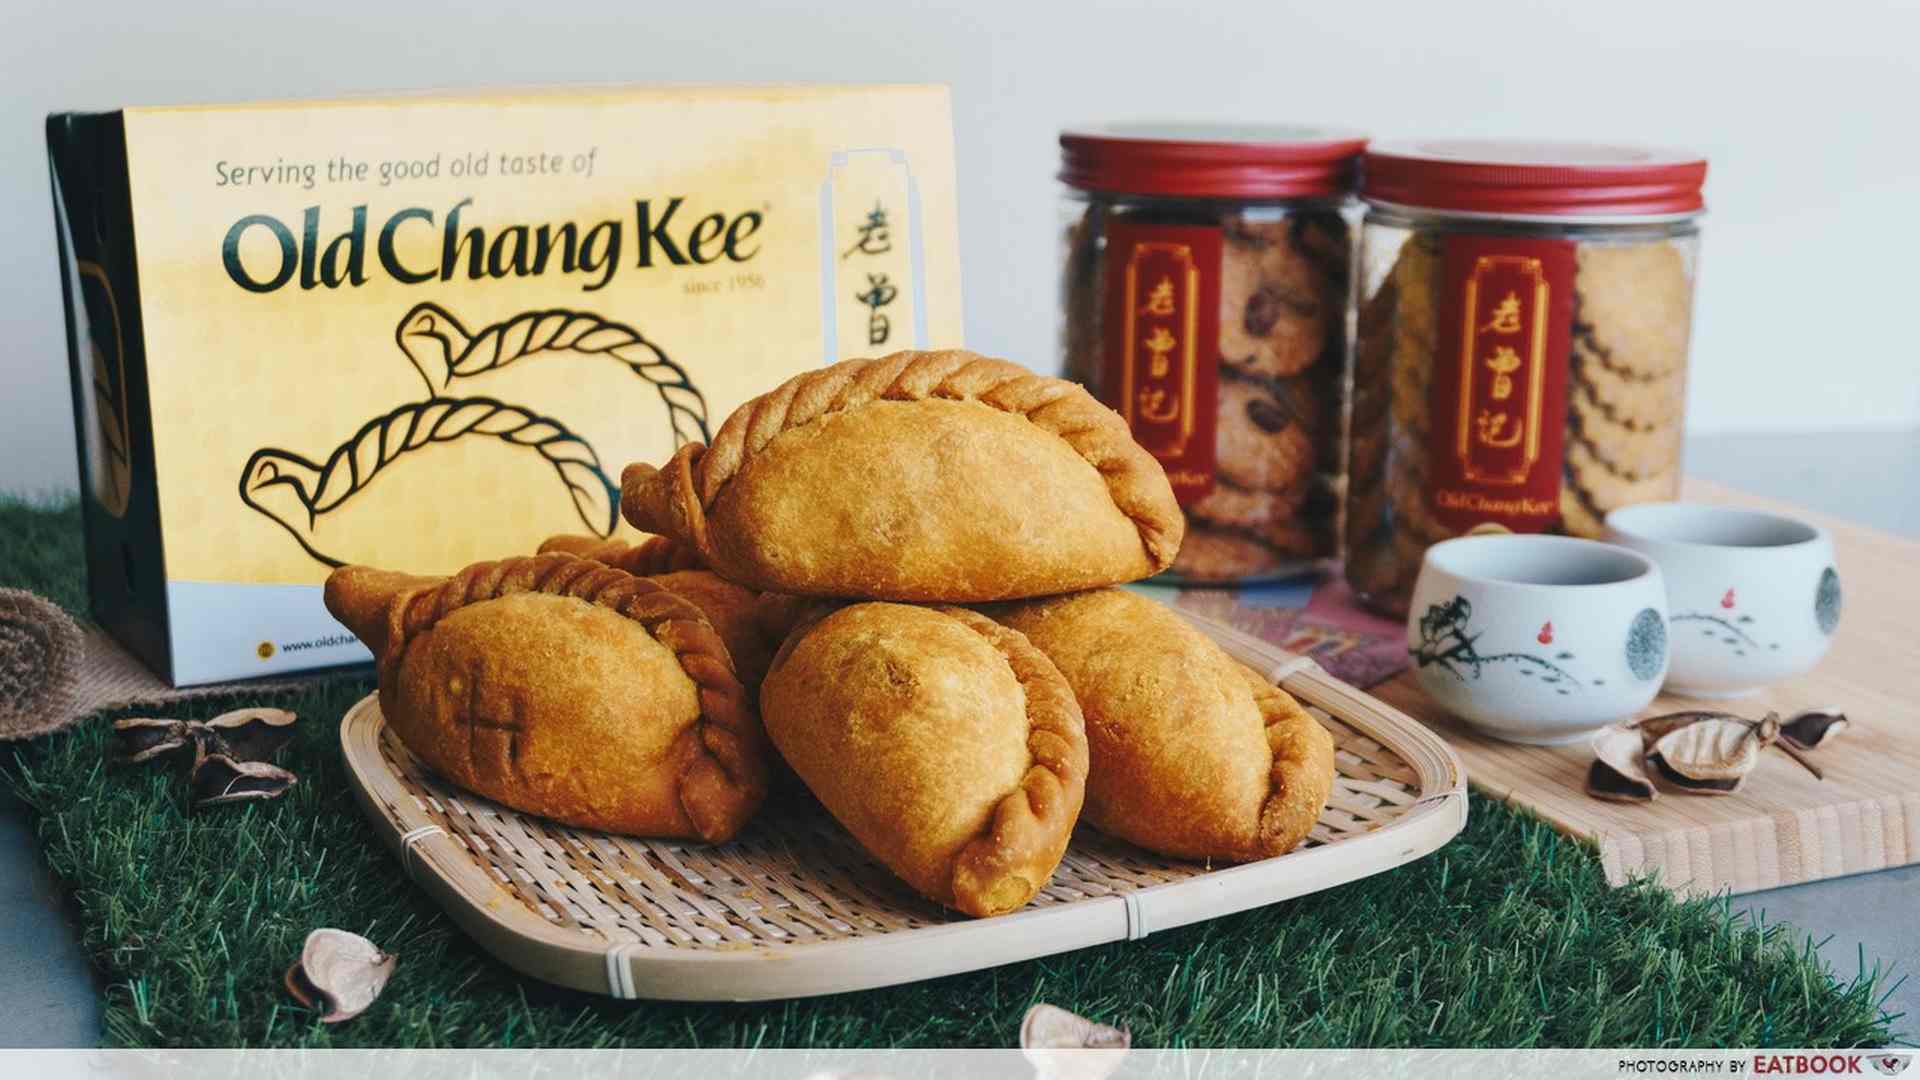 Old Chang Kee - chicken rice curry puff